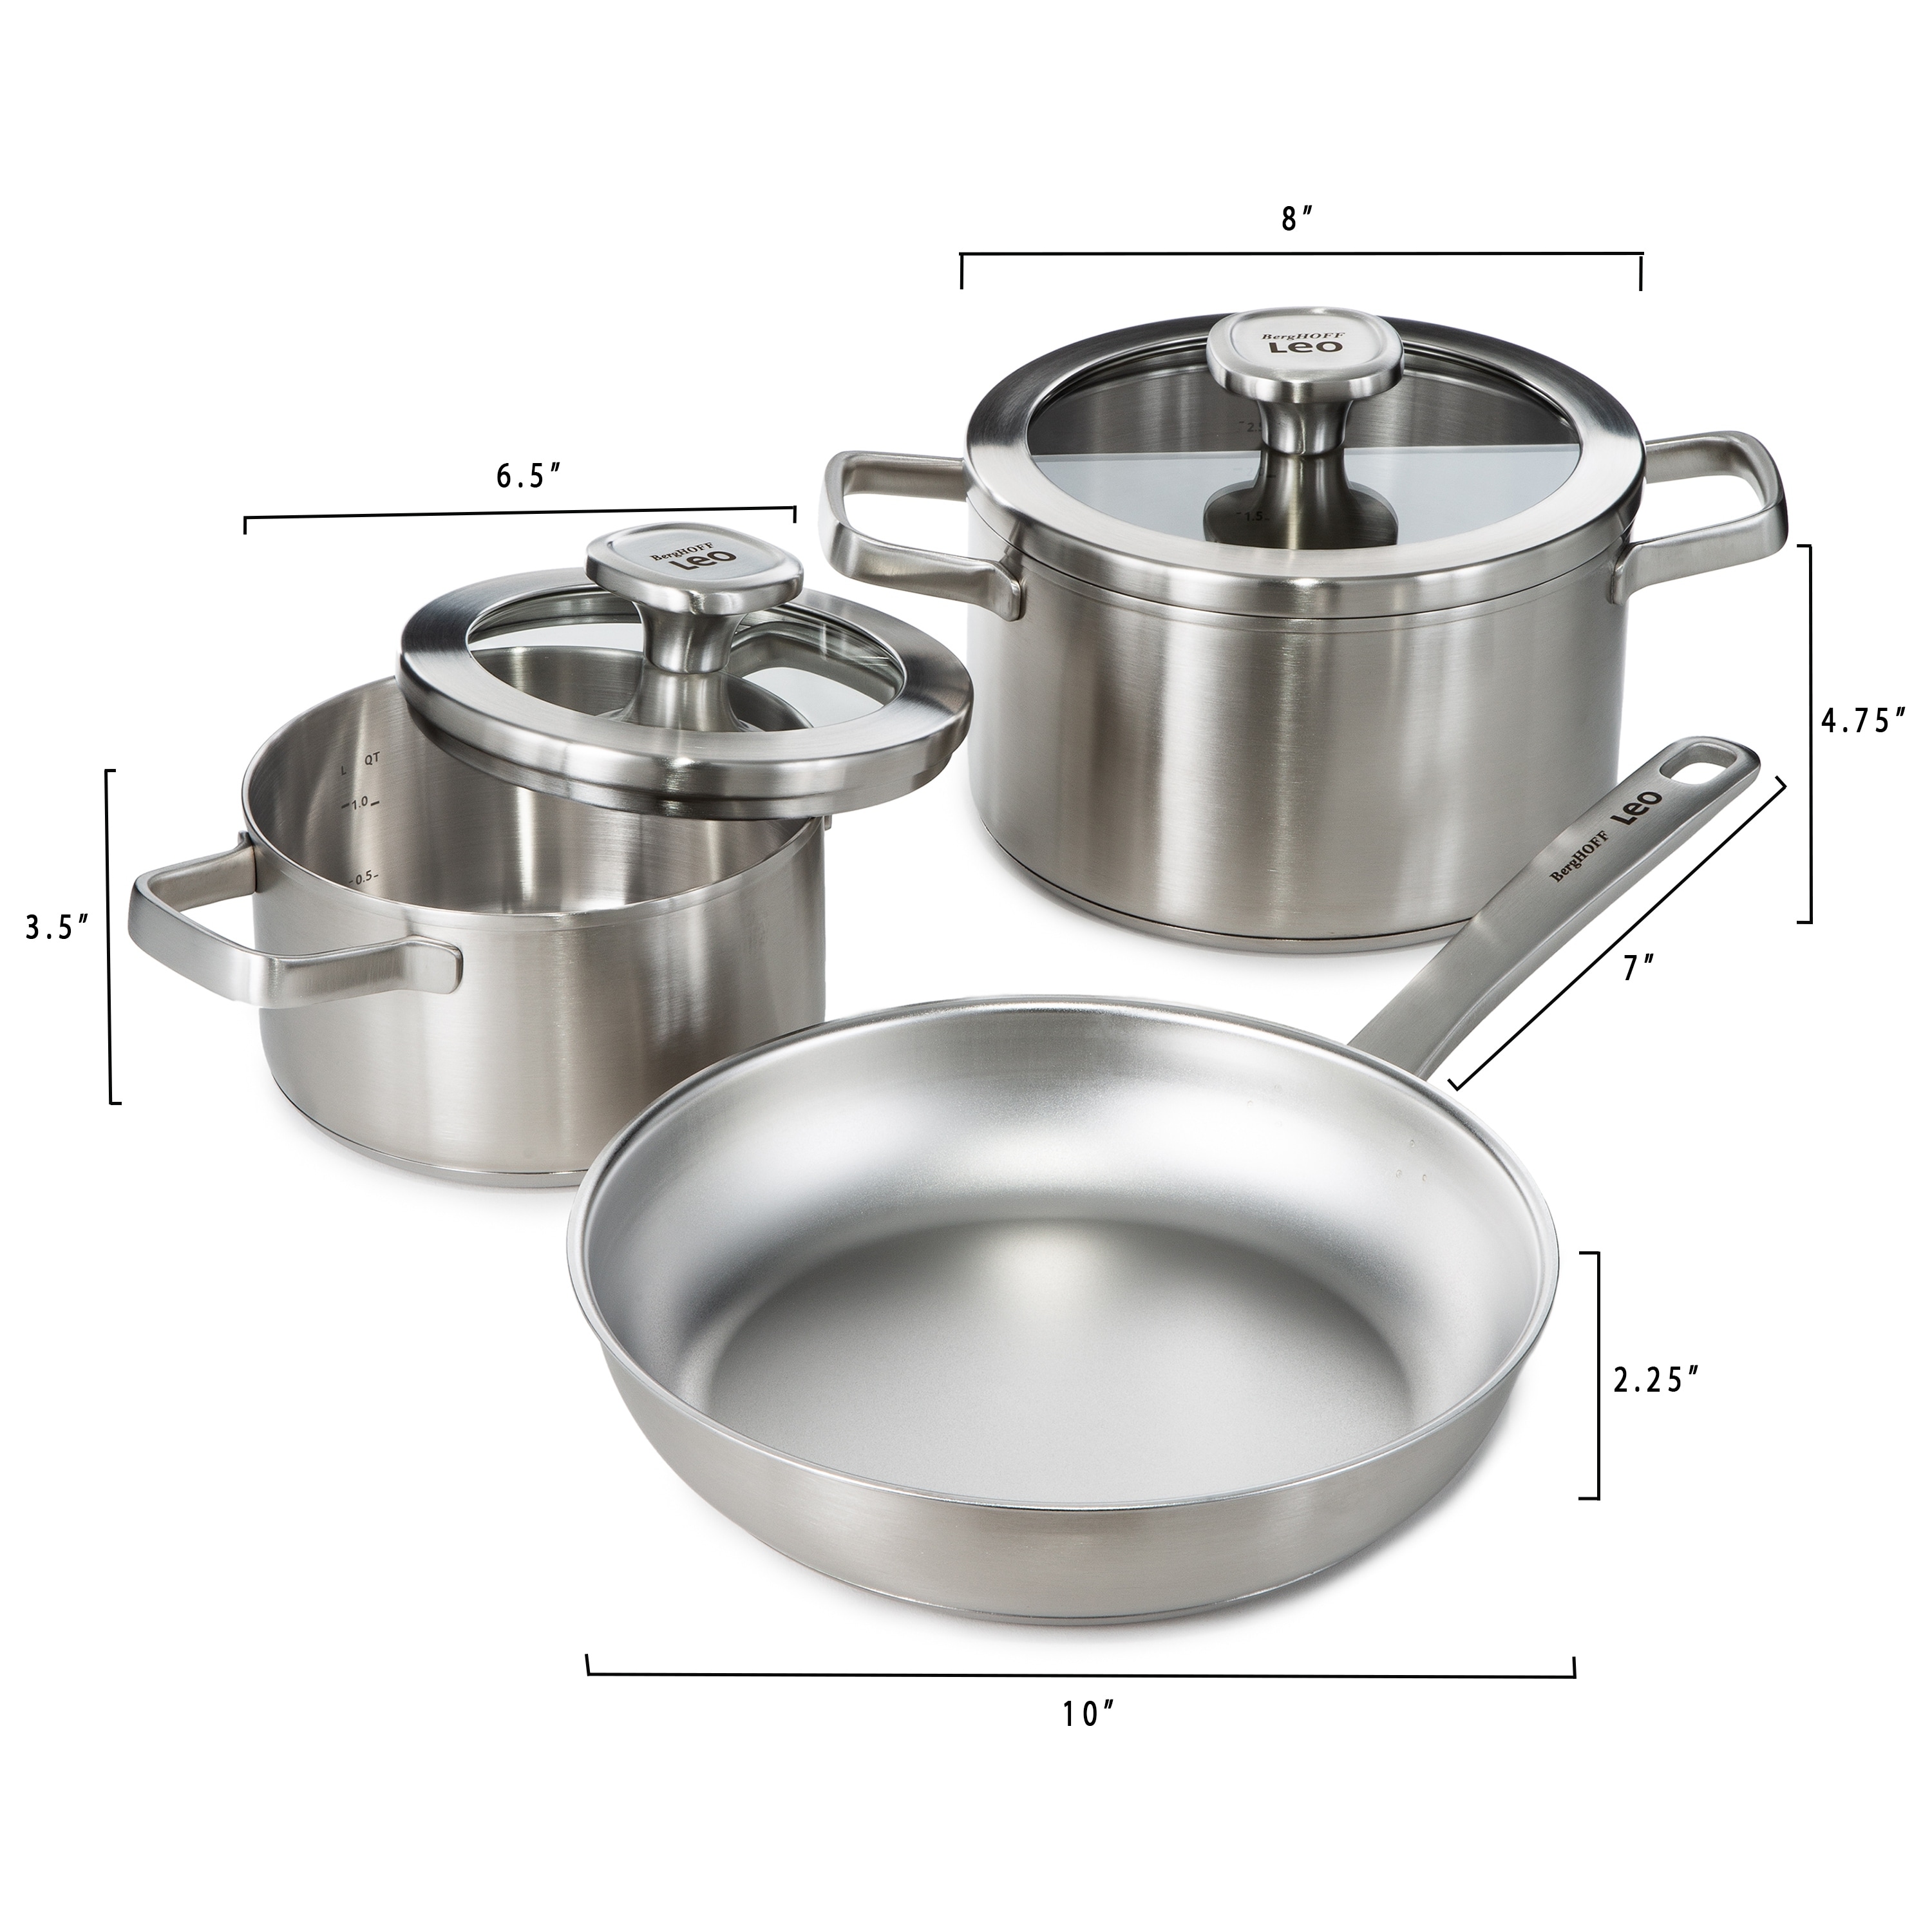 BergHOFF Tri-Ply 18/10 Stainless Steel 10 piece Cookware Set, Hammered